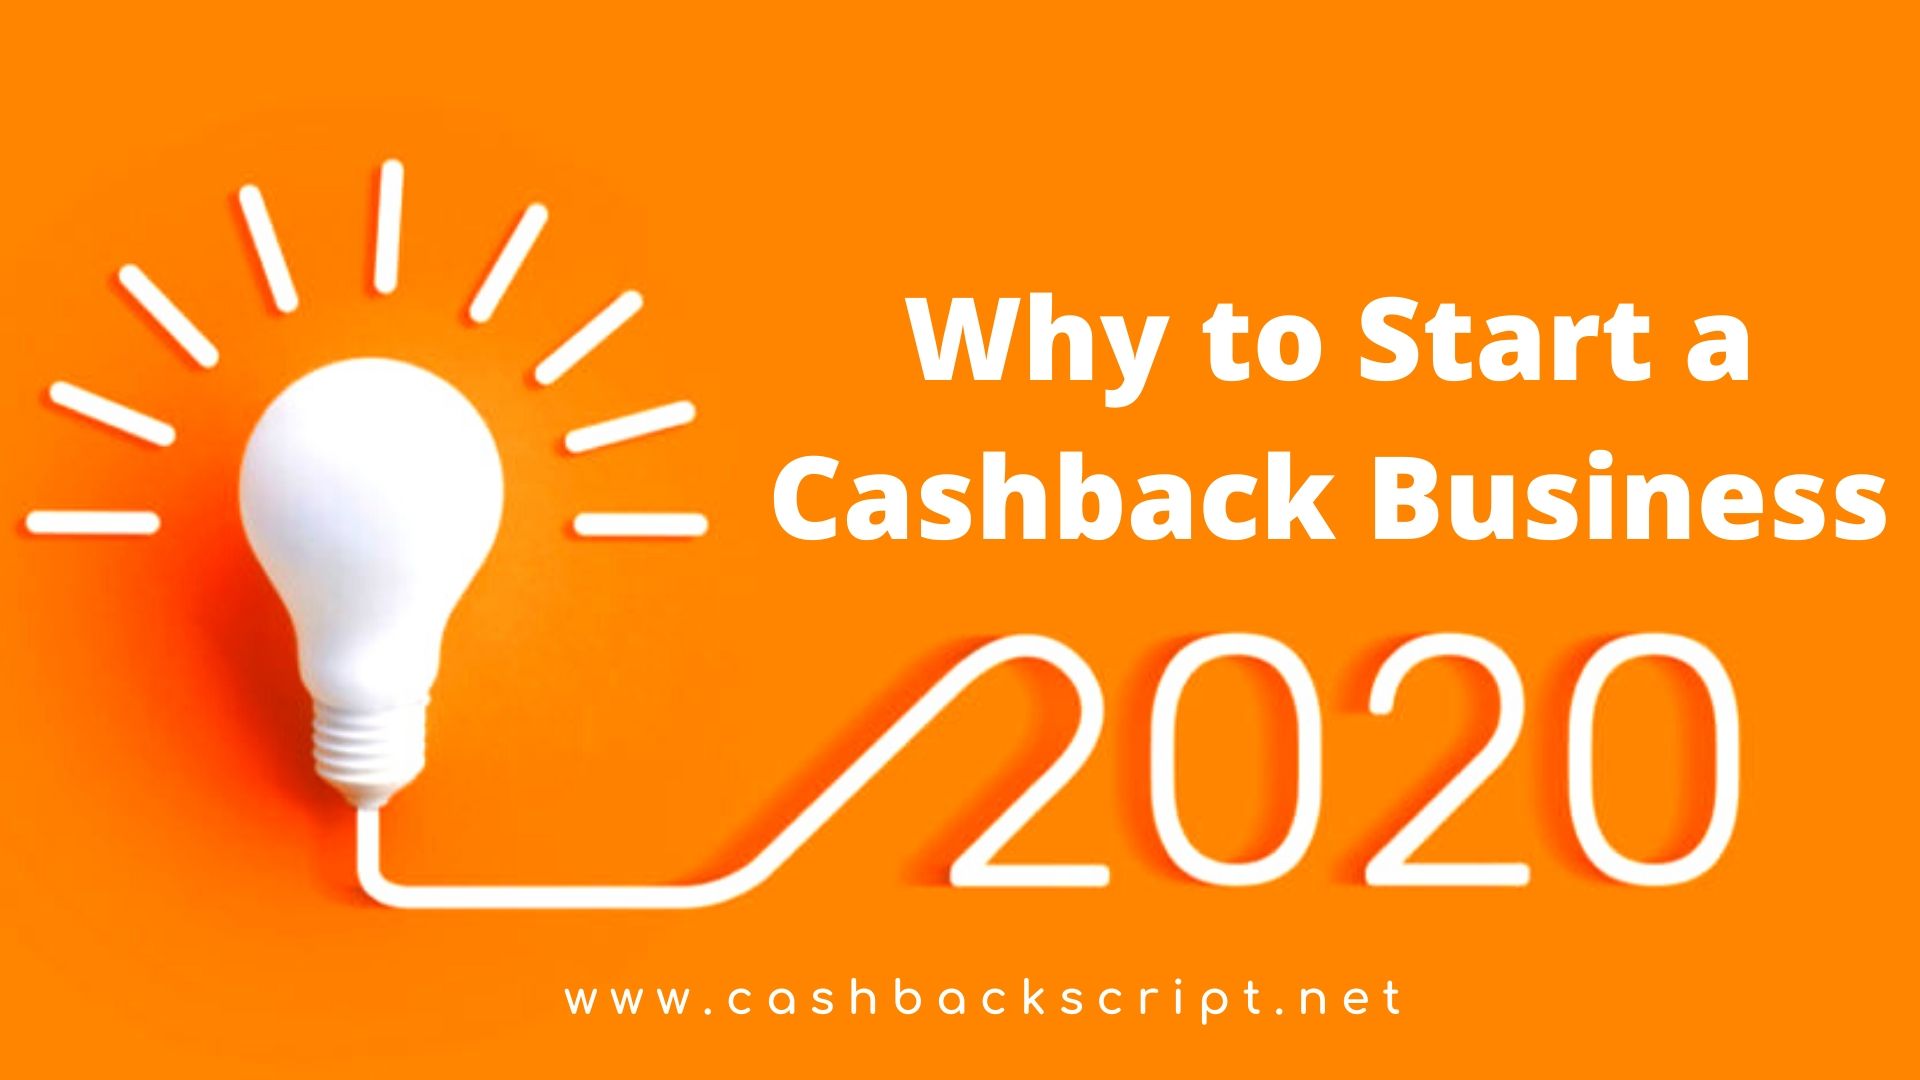 Starting a cashback business - Will it be a best business idea in 2020 ?